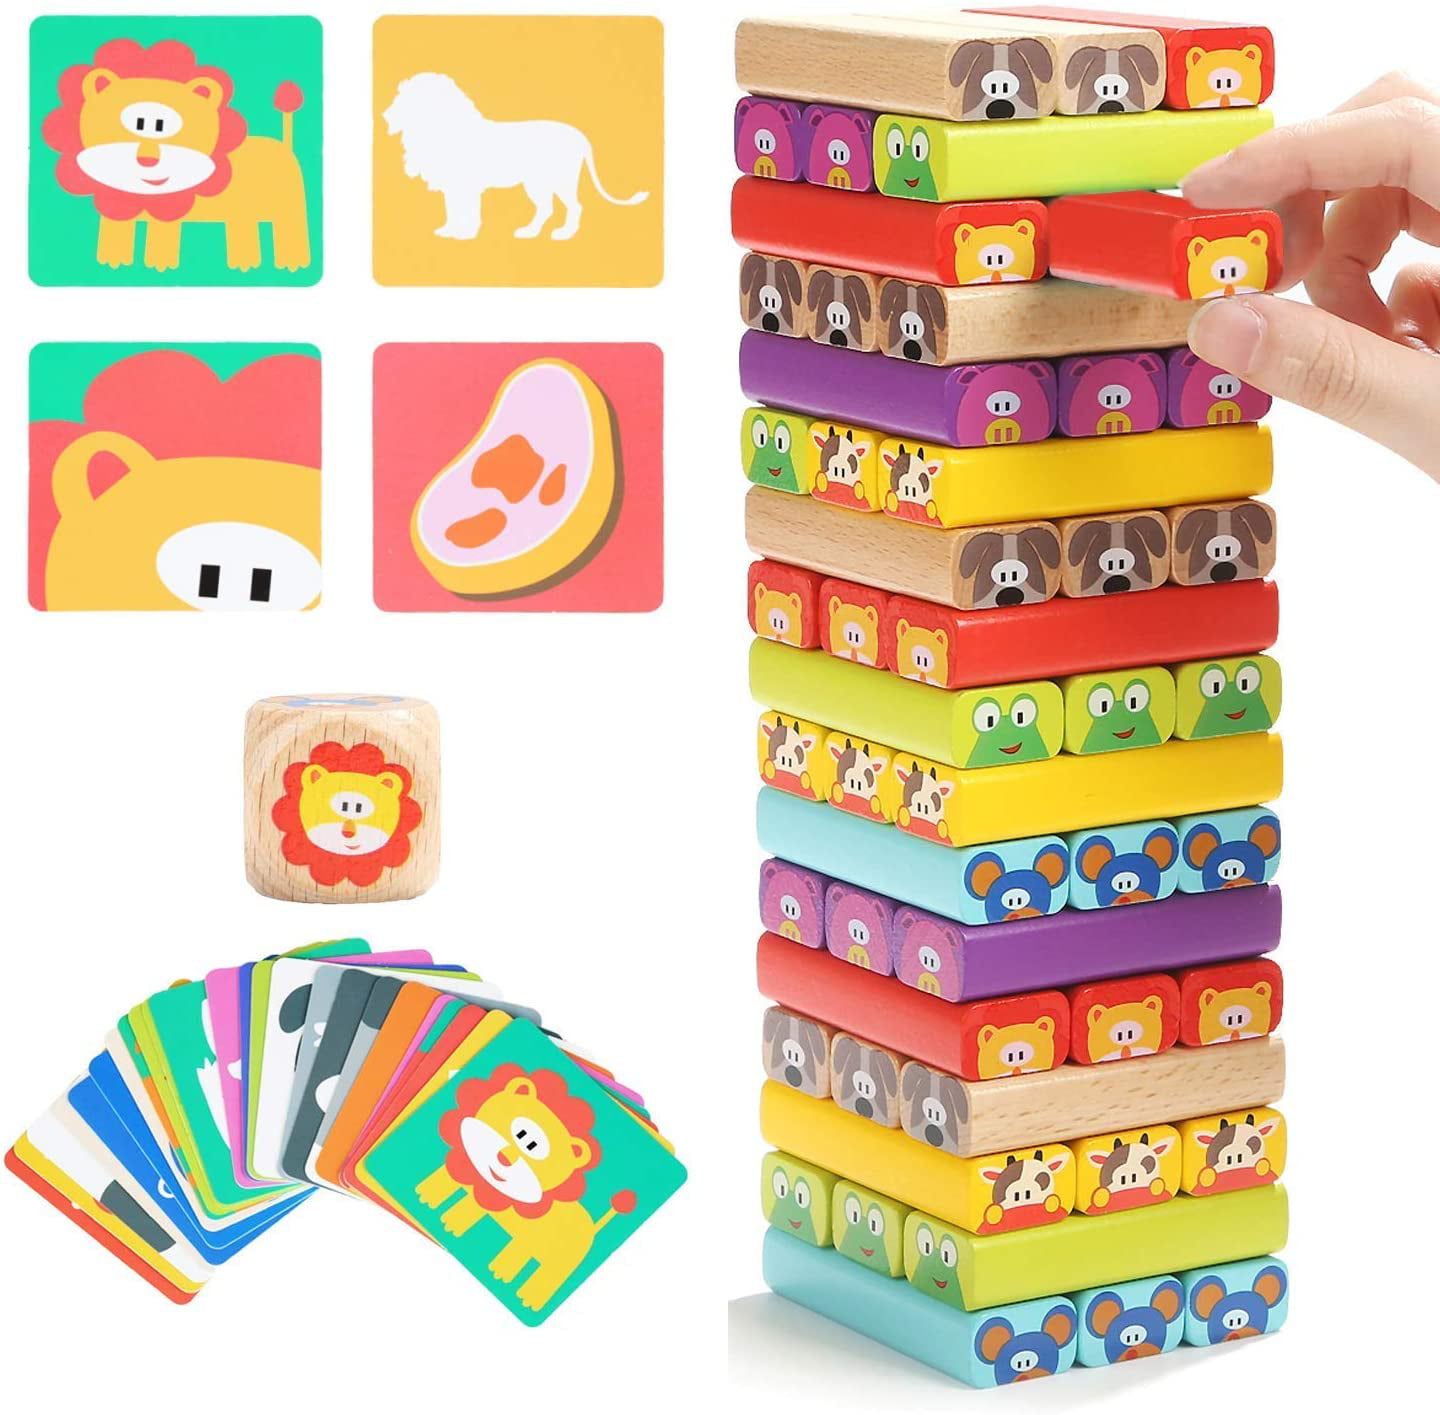 Colored Wooden Blocks Stacking Board Games Tumbling Tower for Kids Ages 4-8 with 51 Pieces